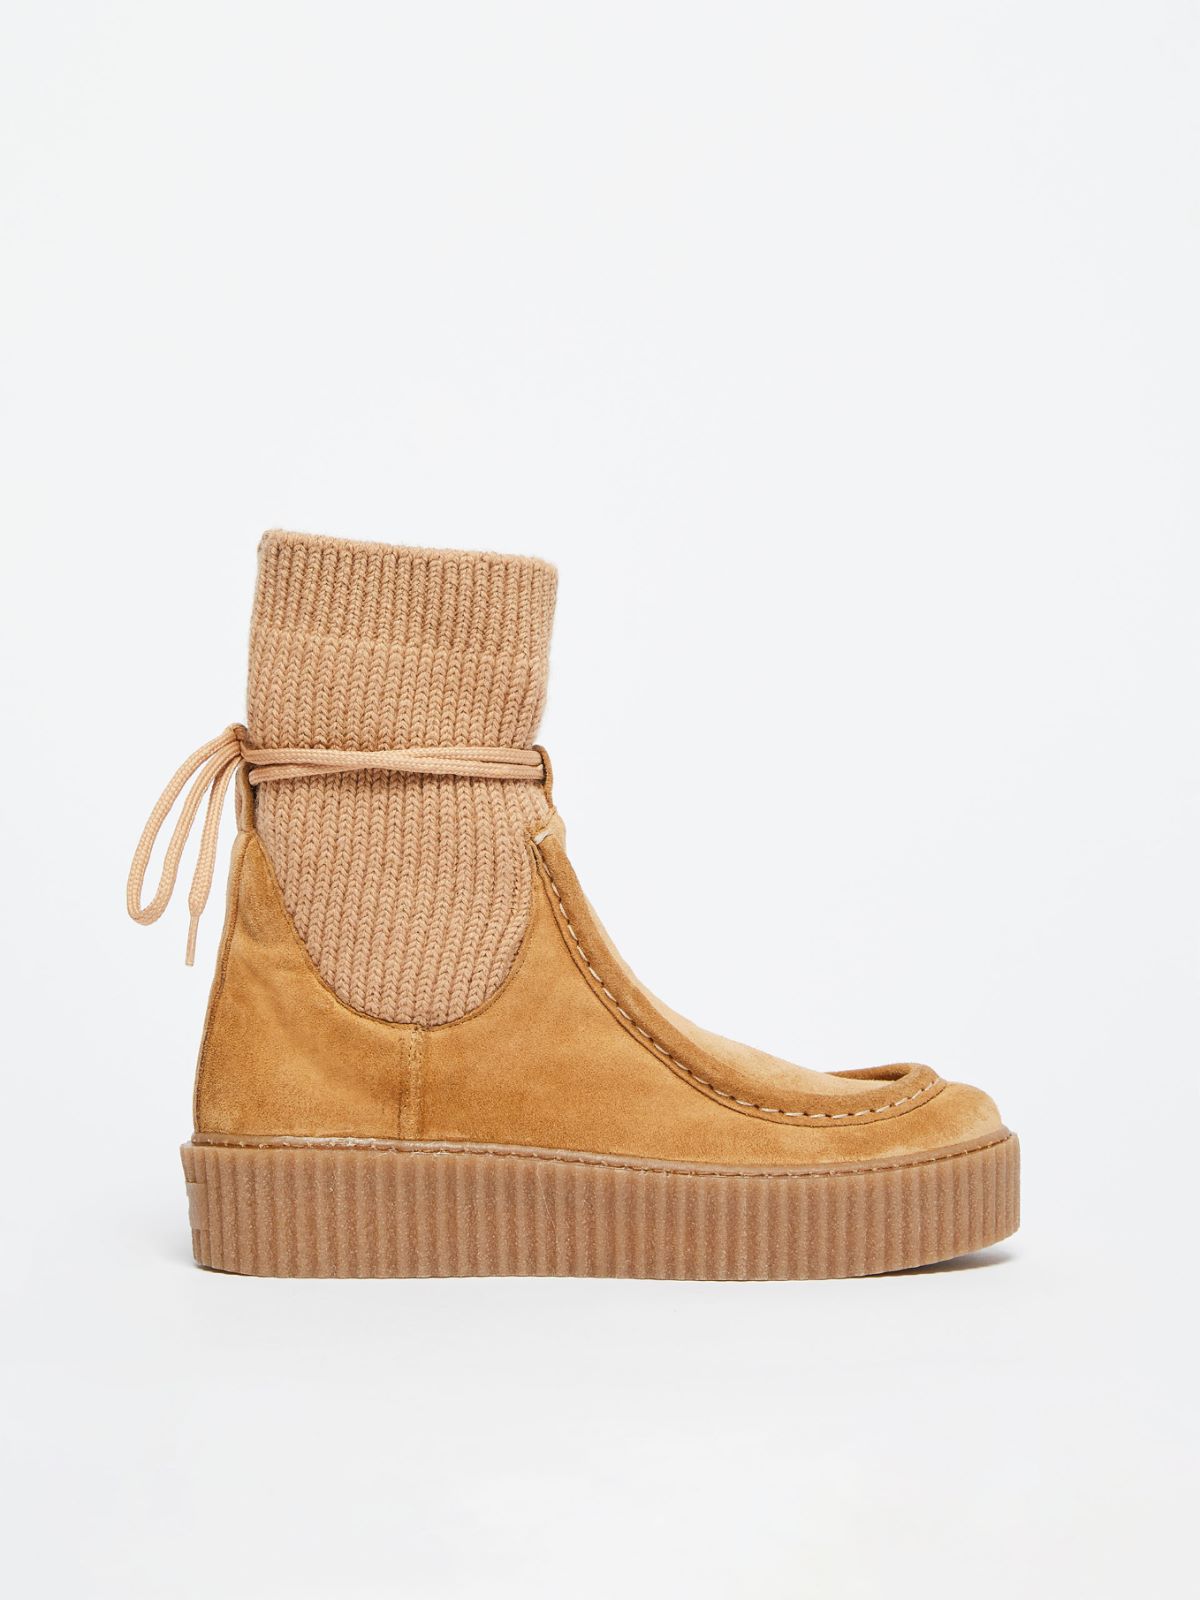 Split leather and knit ankle boots - MUSTARD - Weekend Max Mara